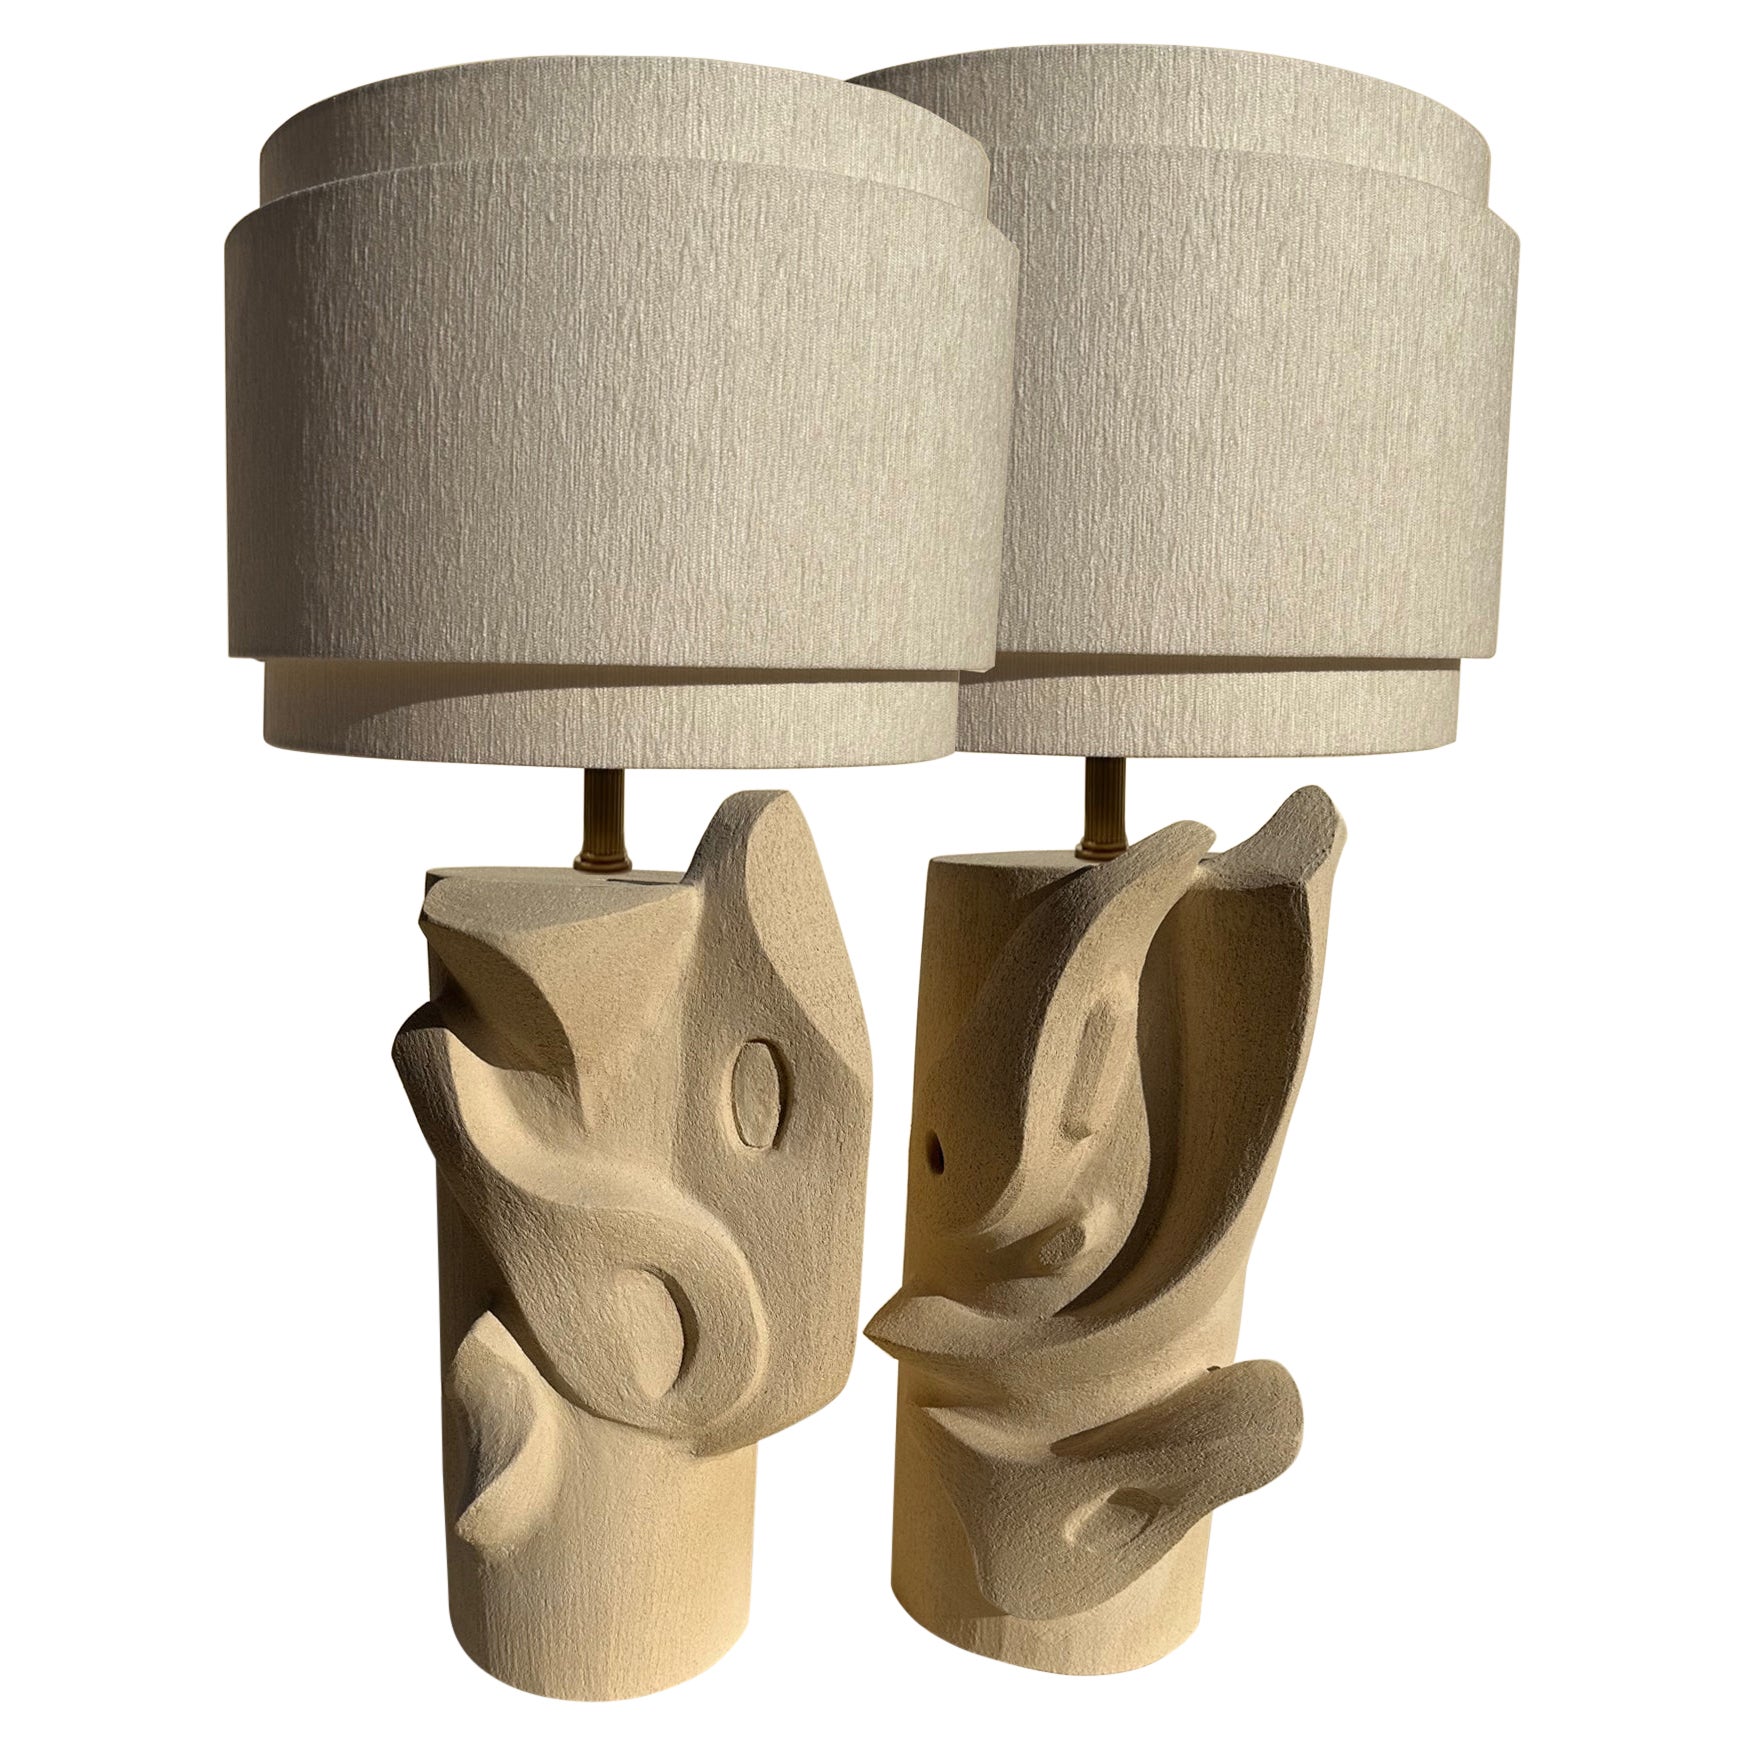 Bas Relief Table Lamp by Olivia Cognet